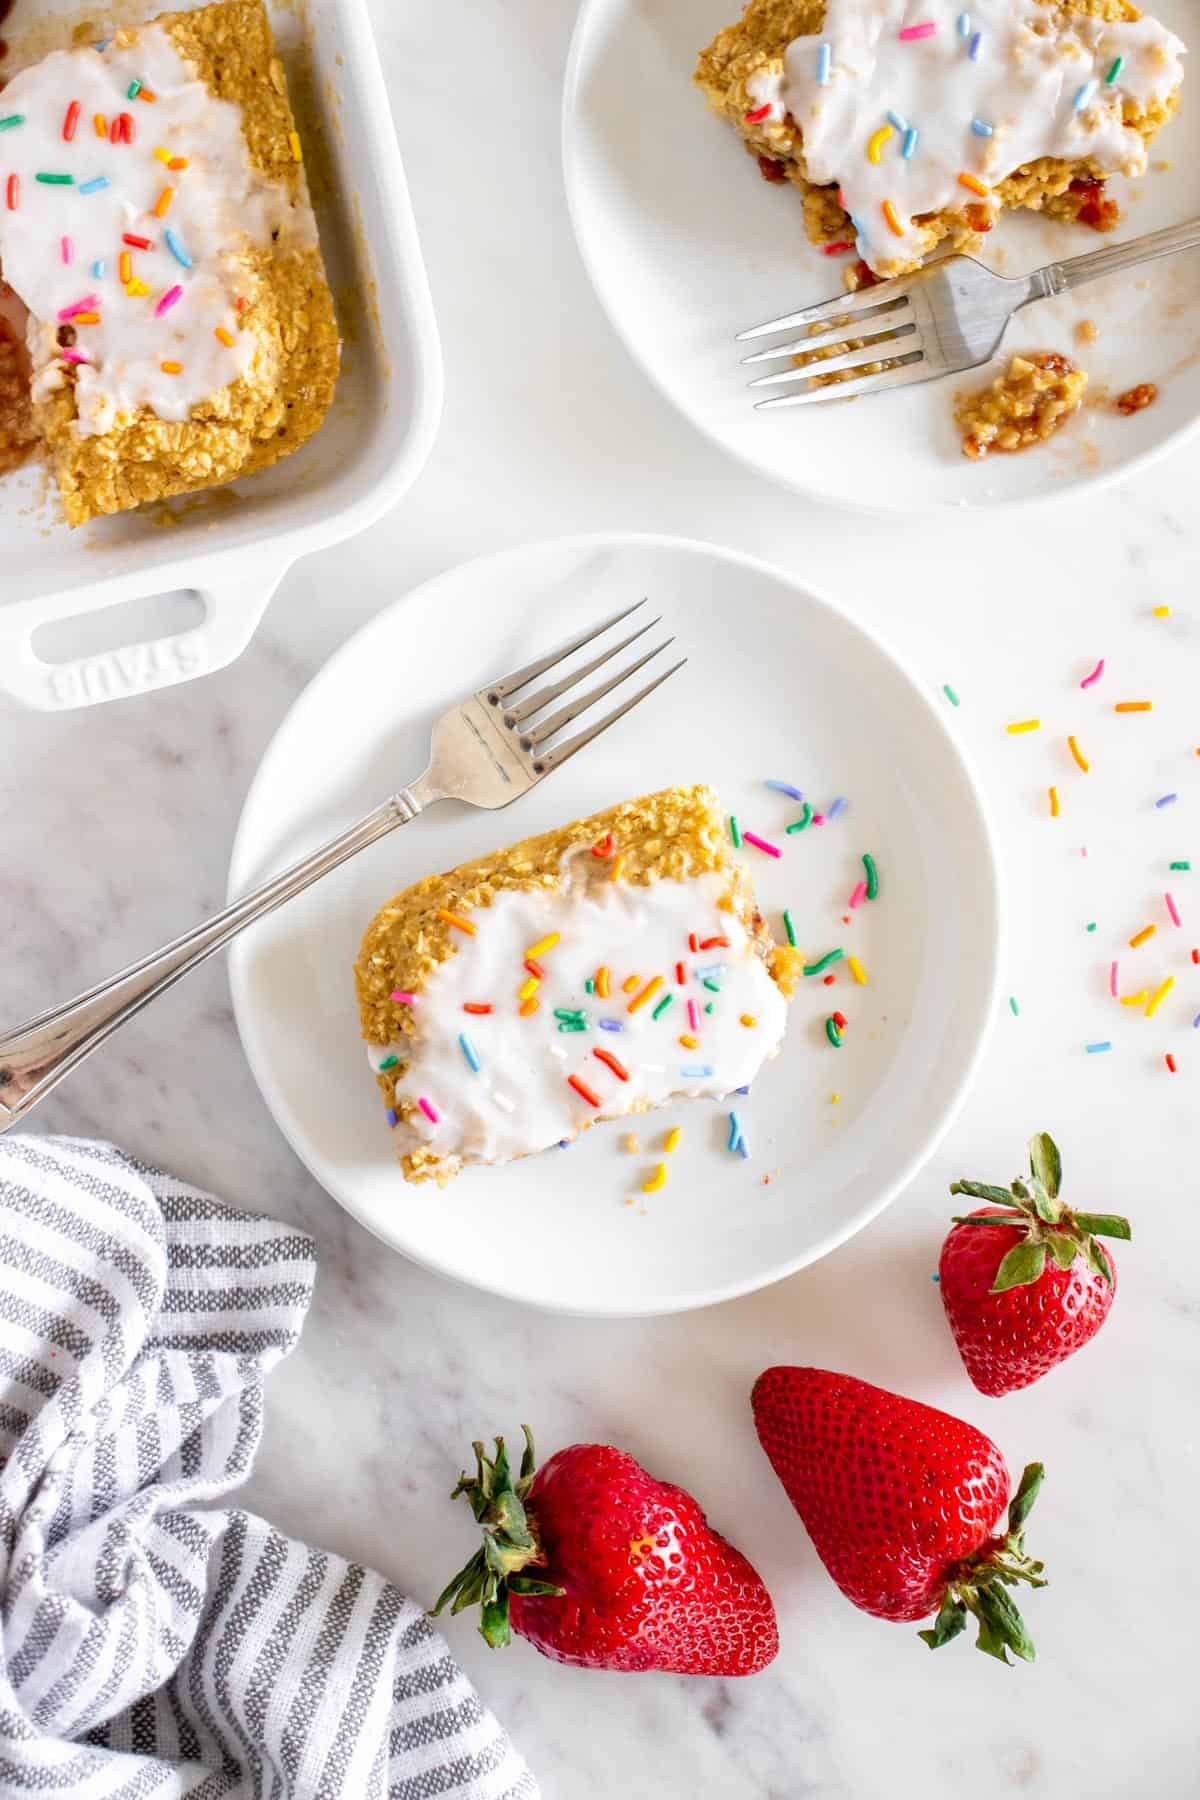 Strawberry pop tart baked oats with frosting and sprinkles served on a white plate.